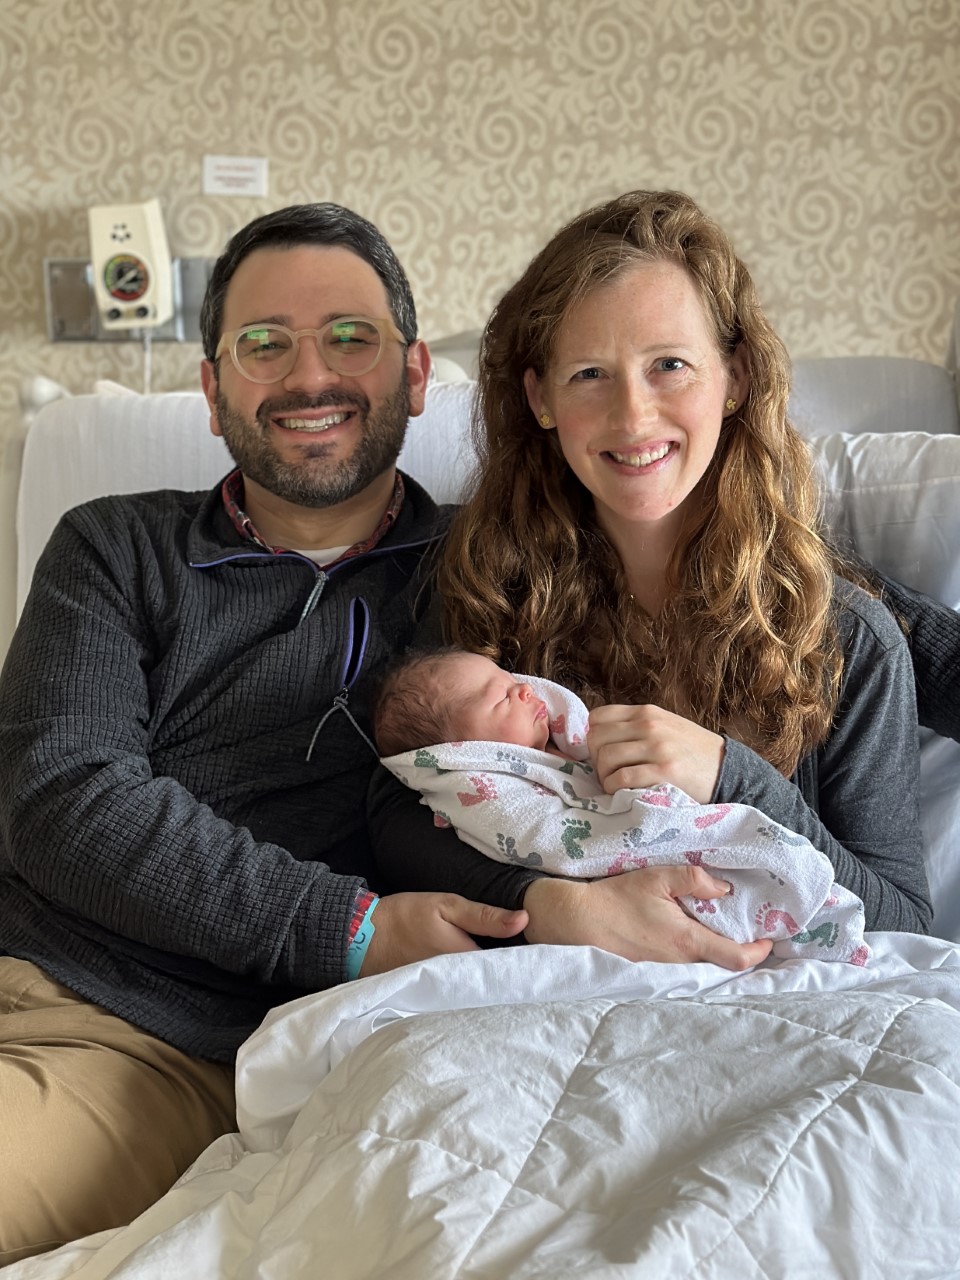 The Rev. Andy and Catherine Olivo with daughter Sydney